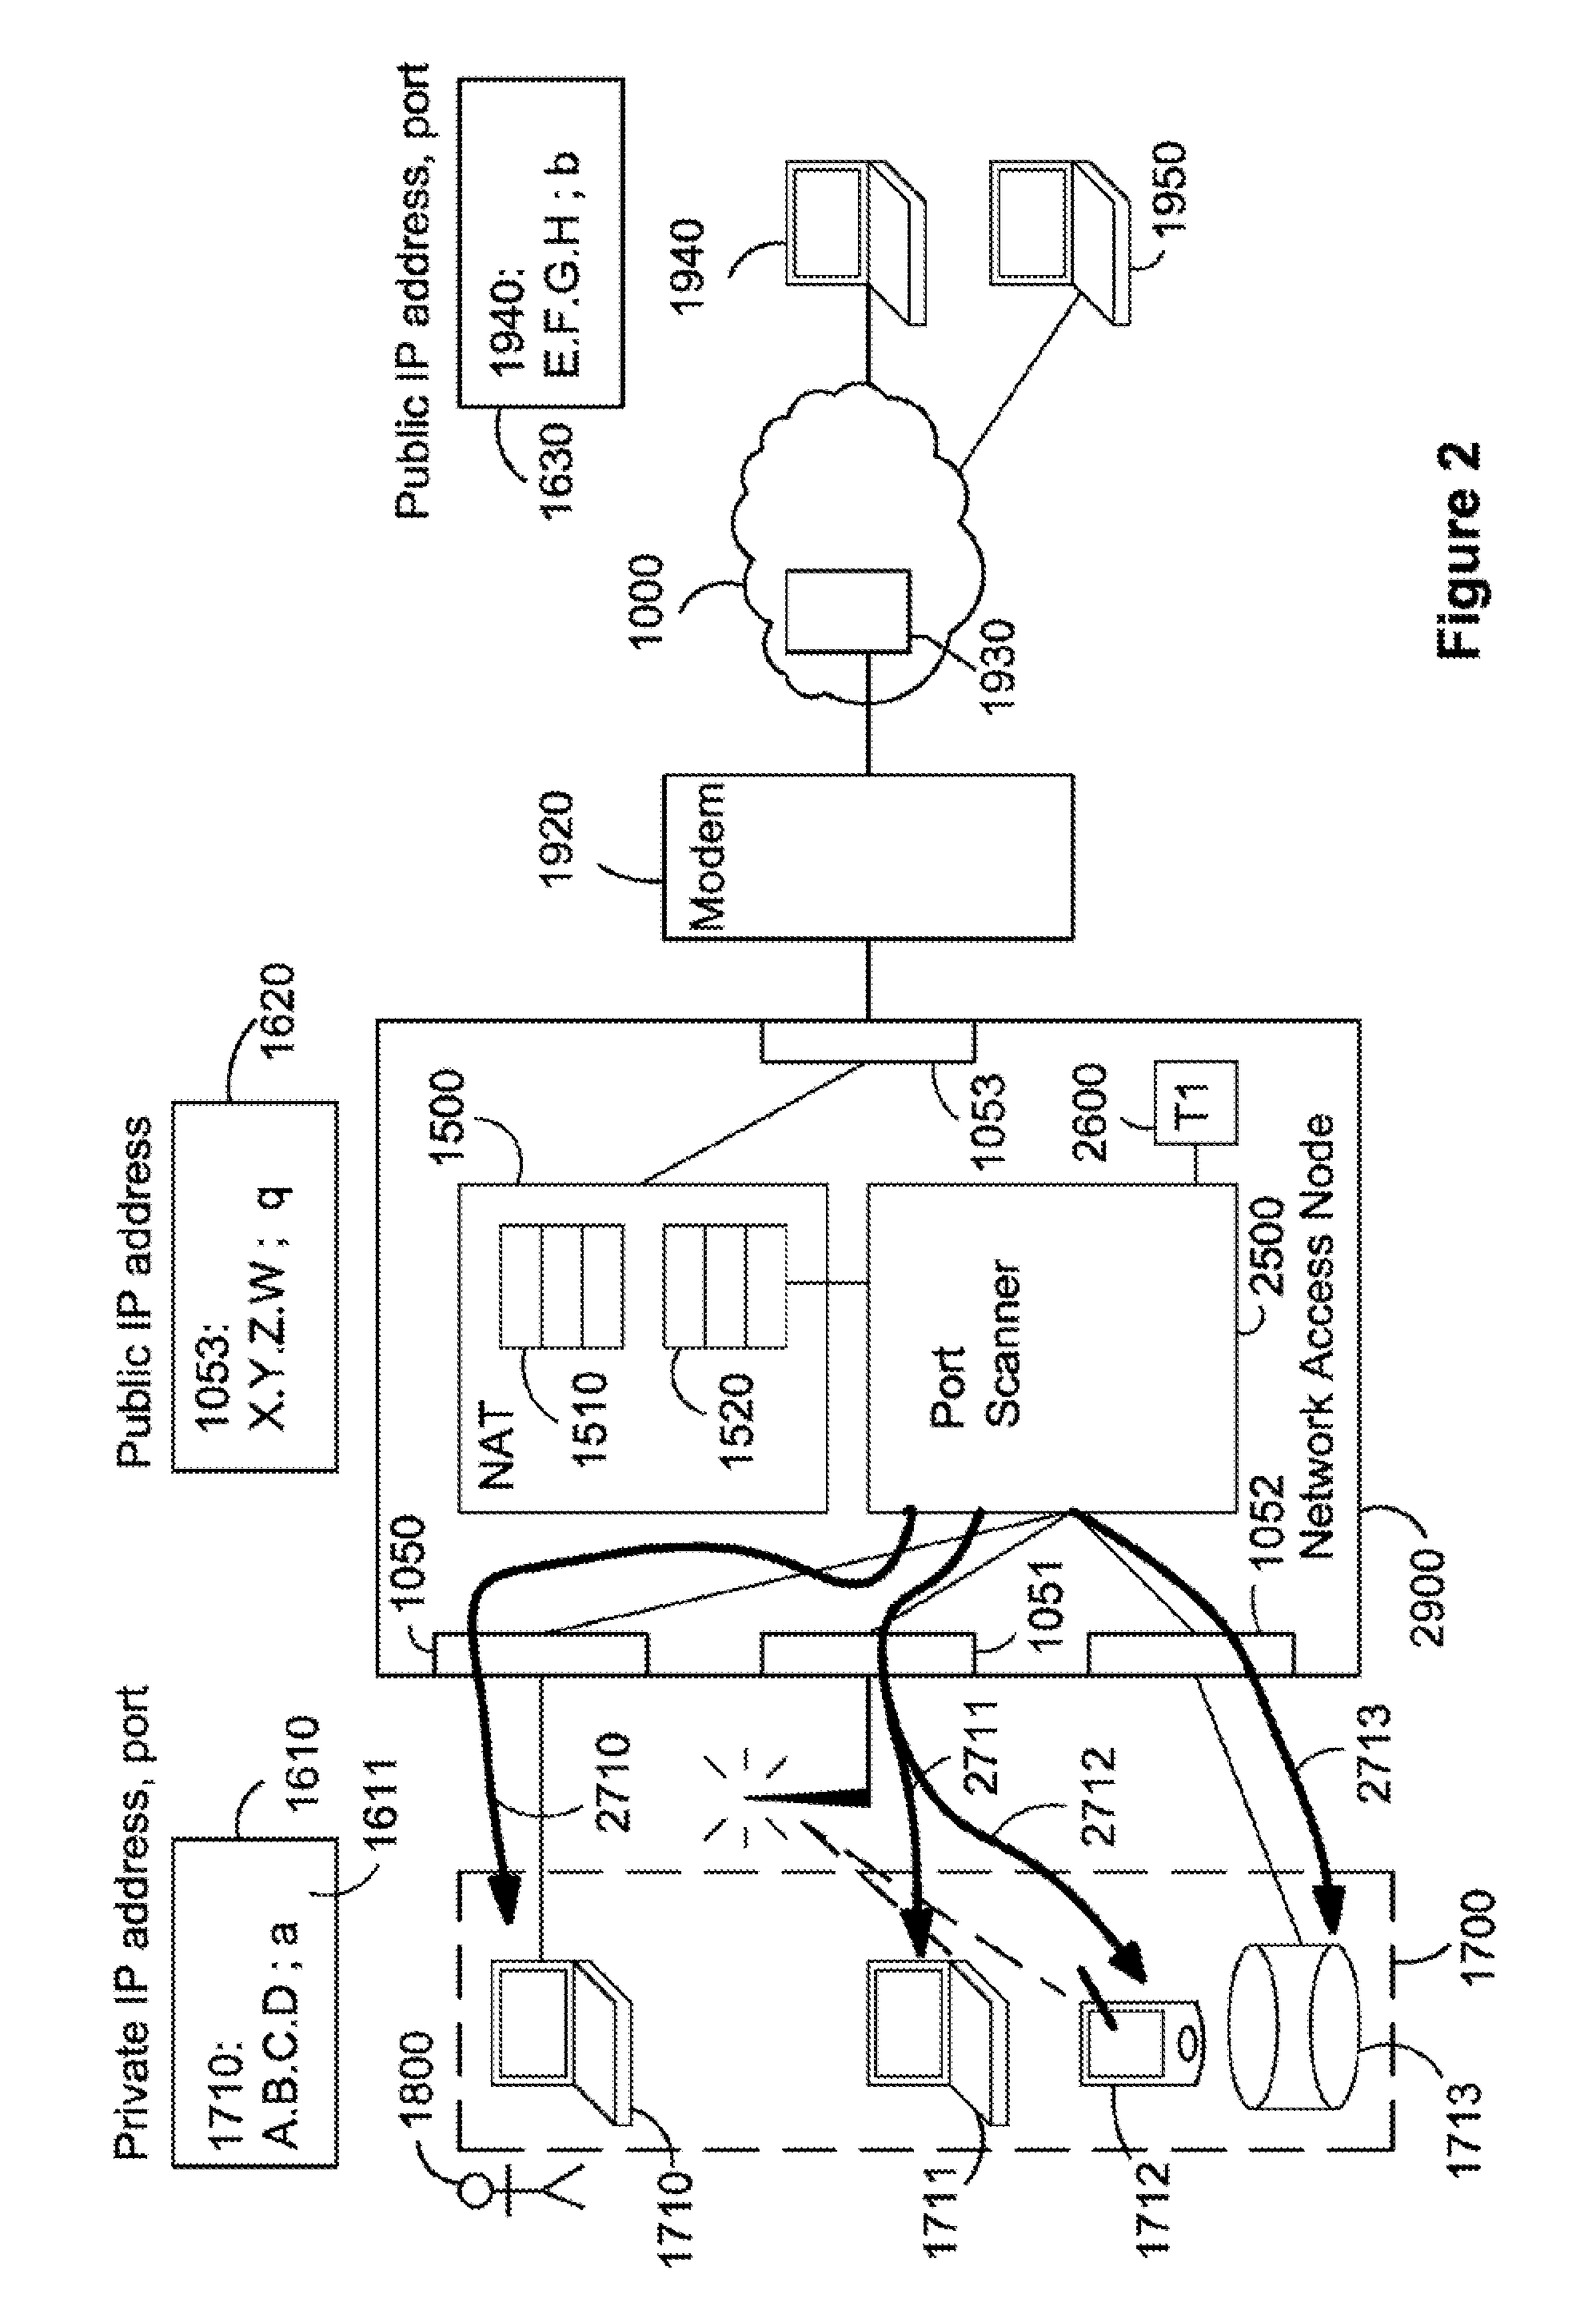 Method of facilitating IP connections to hosts behind middleboxes